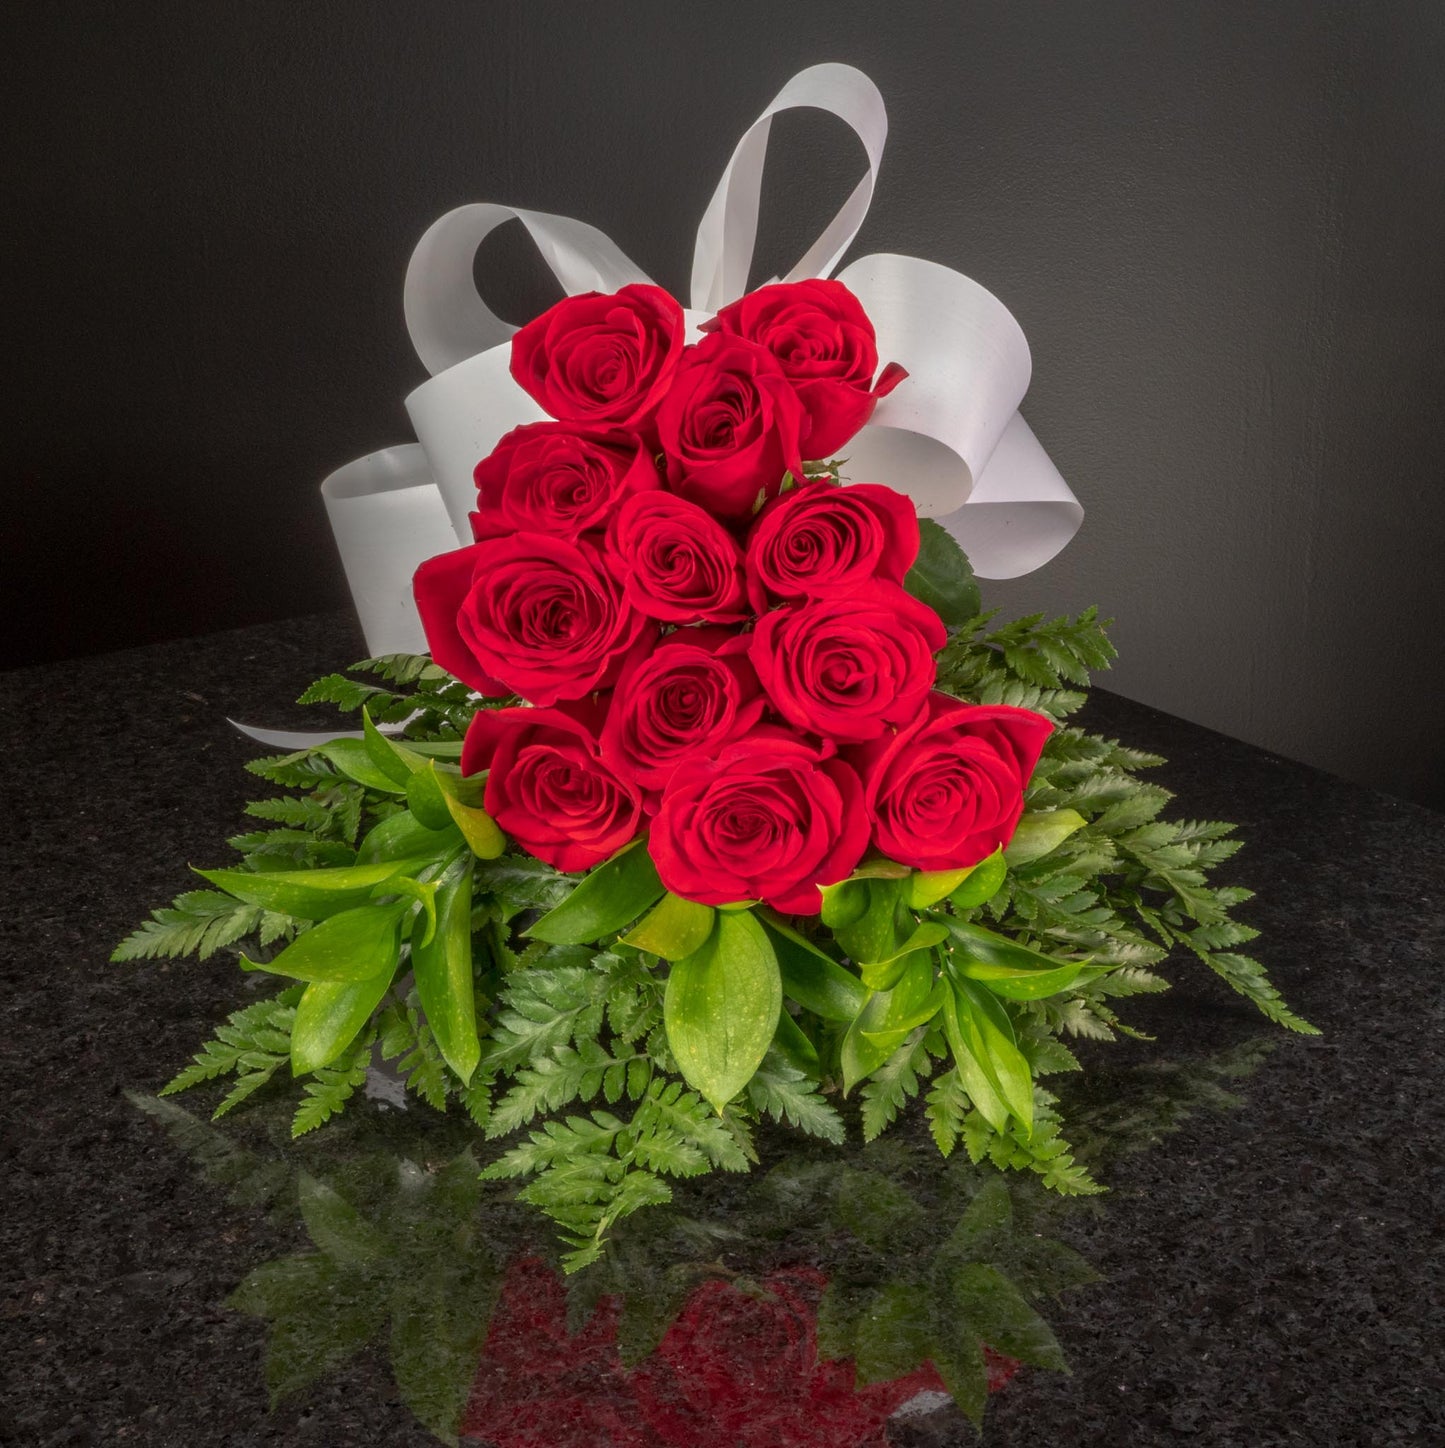  12 Roses / Hand-Tied / Basic